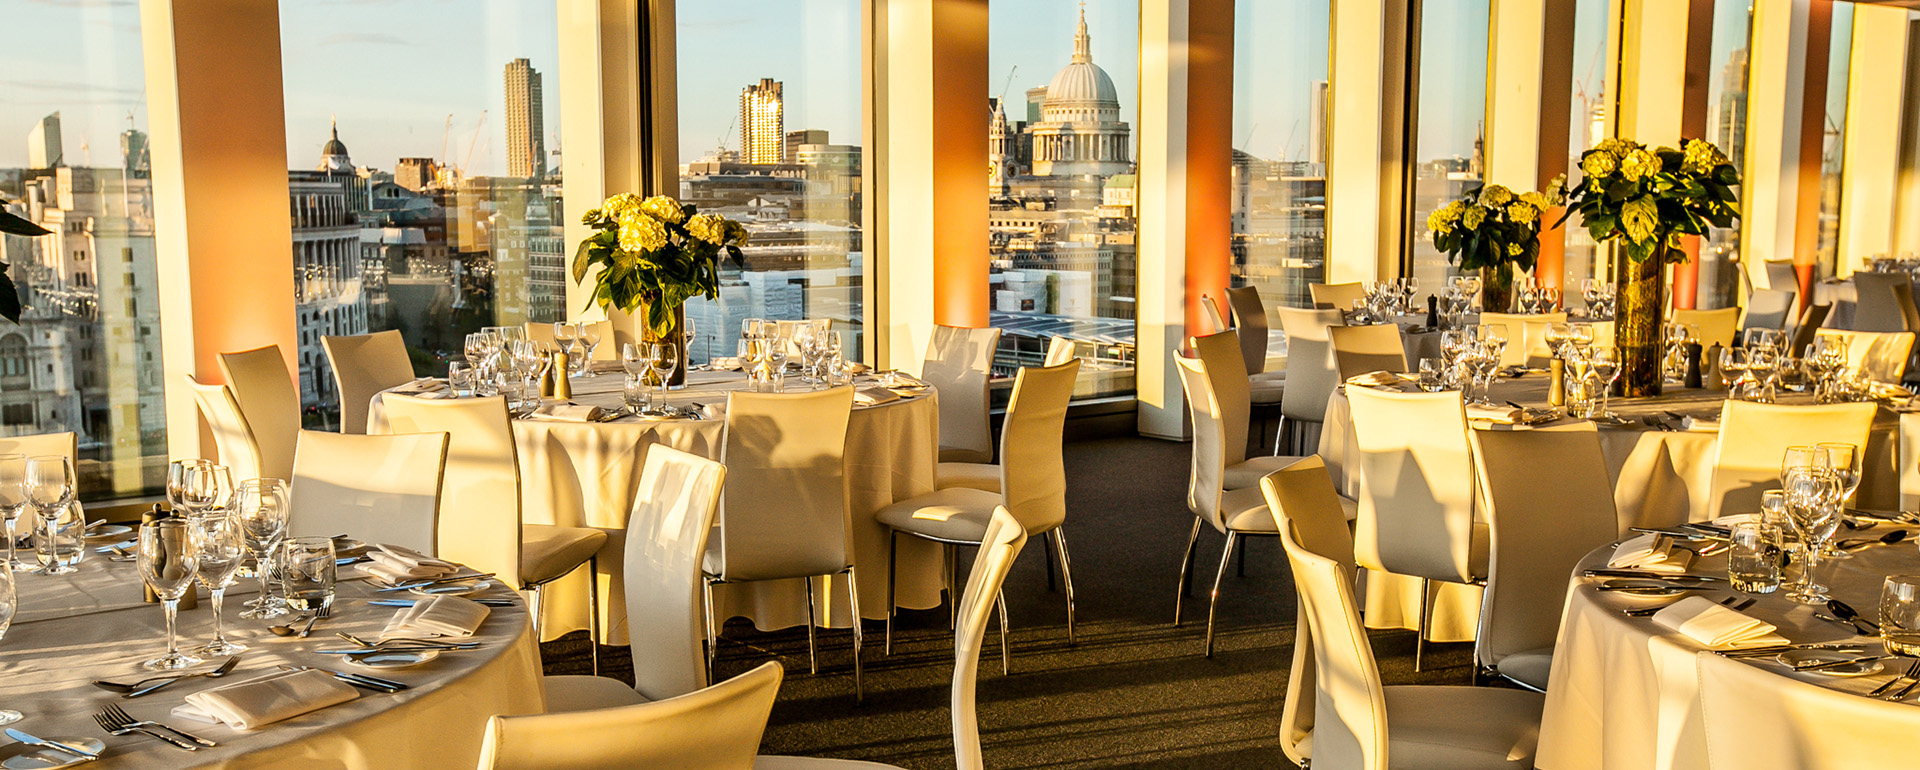 Dining tables with a view of St Pauls